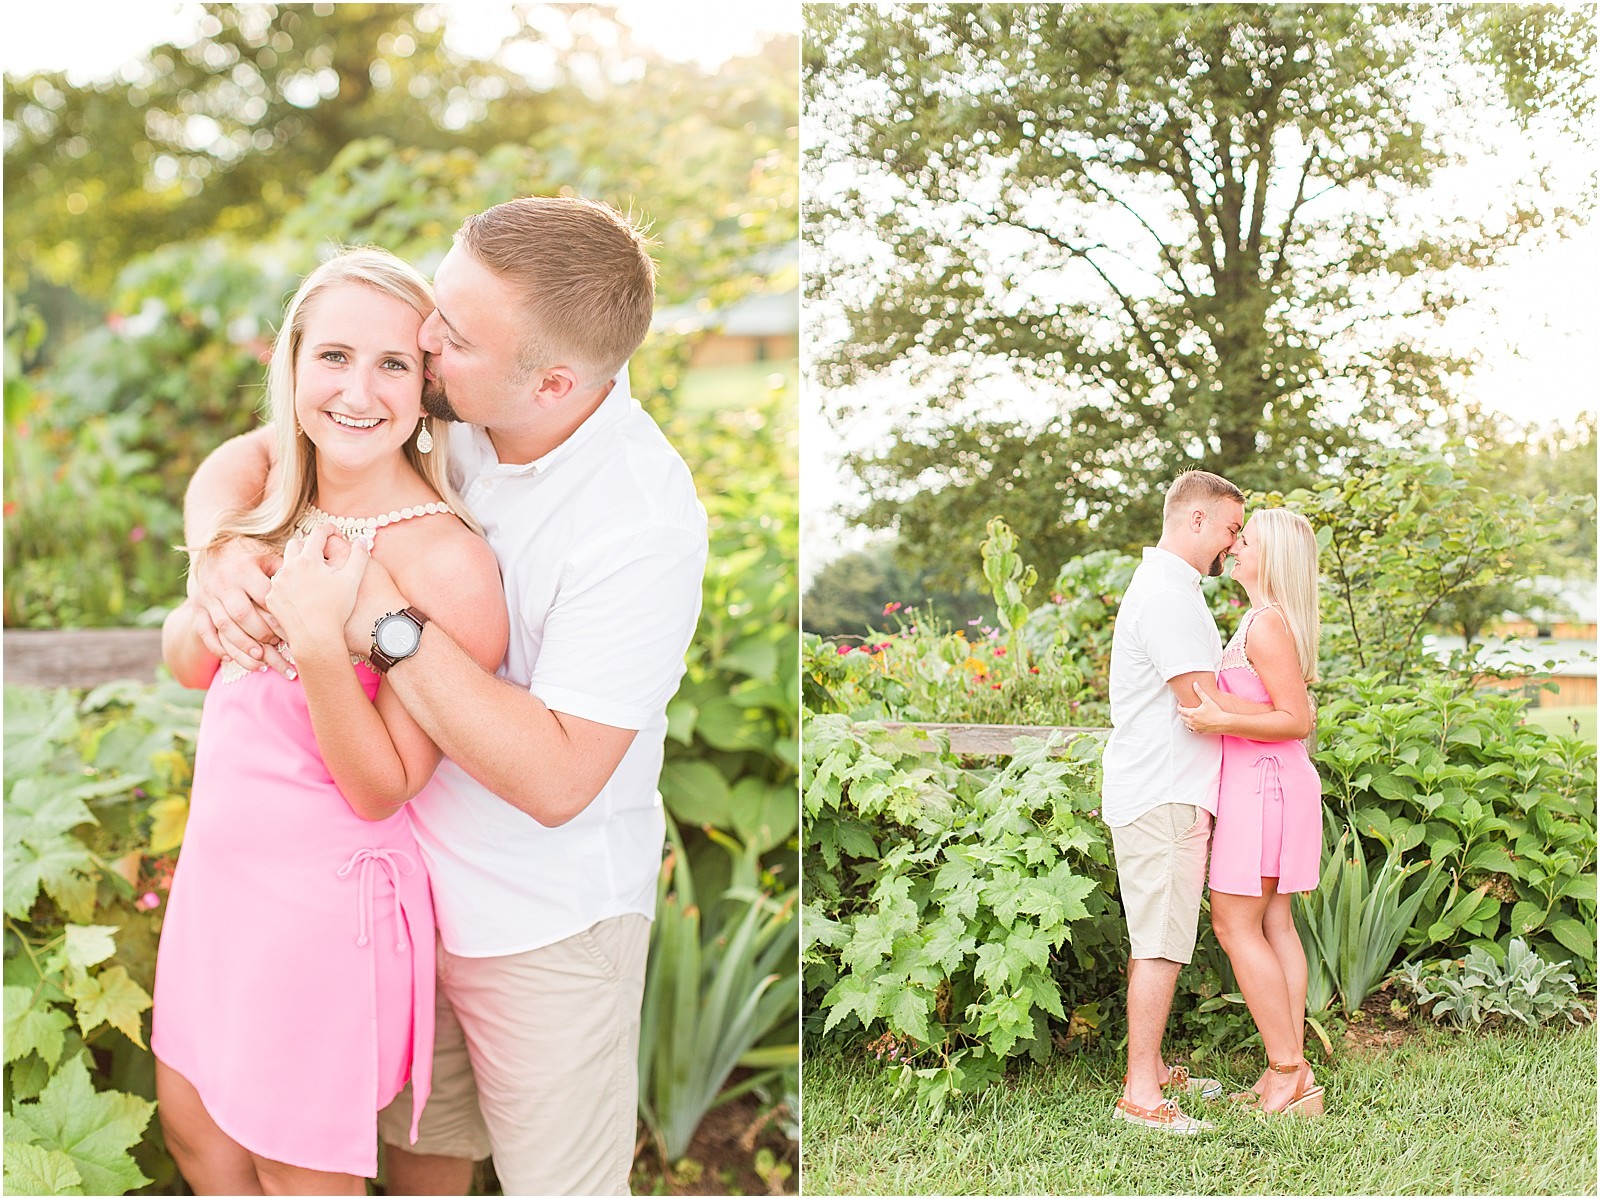 Lauren and Bryce | The Corner House B&ed and Breakfast Engagement Session | Bret and Brandie Photography 009.jpg